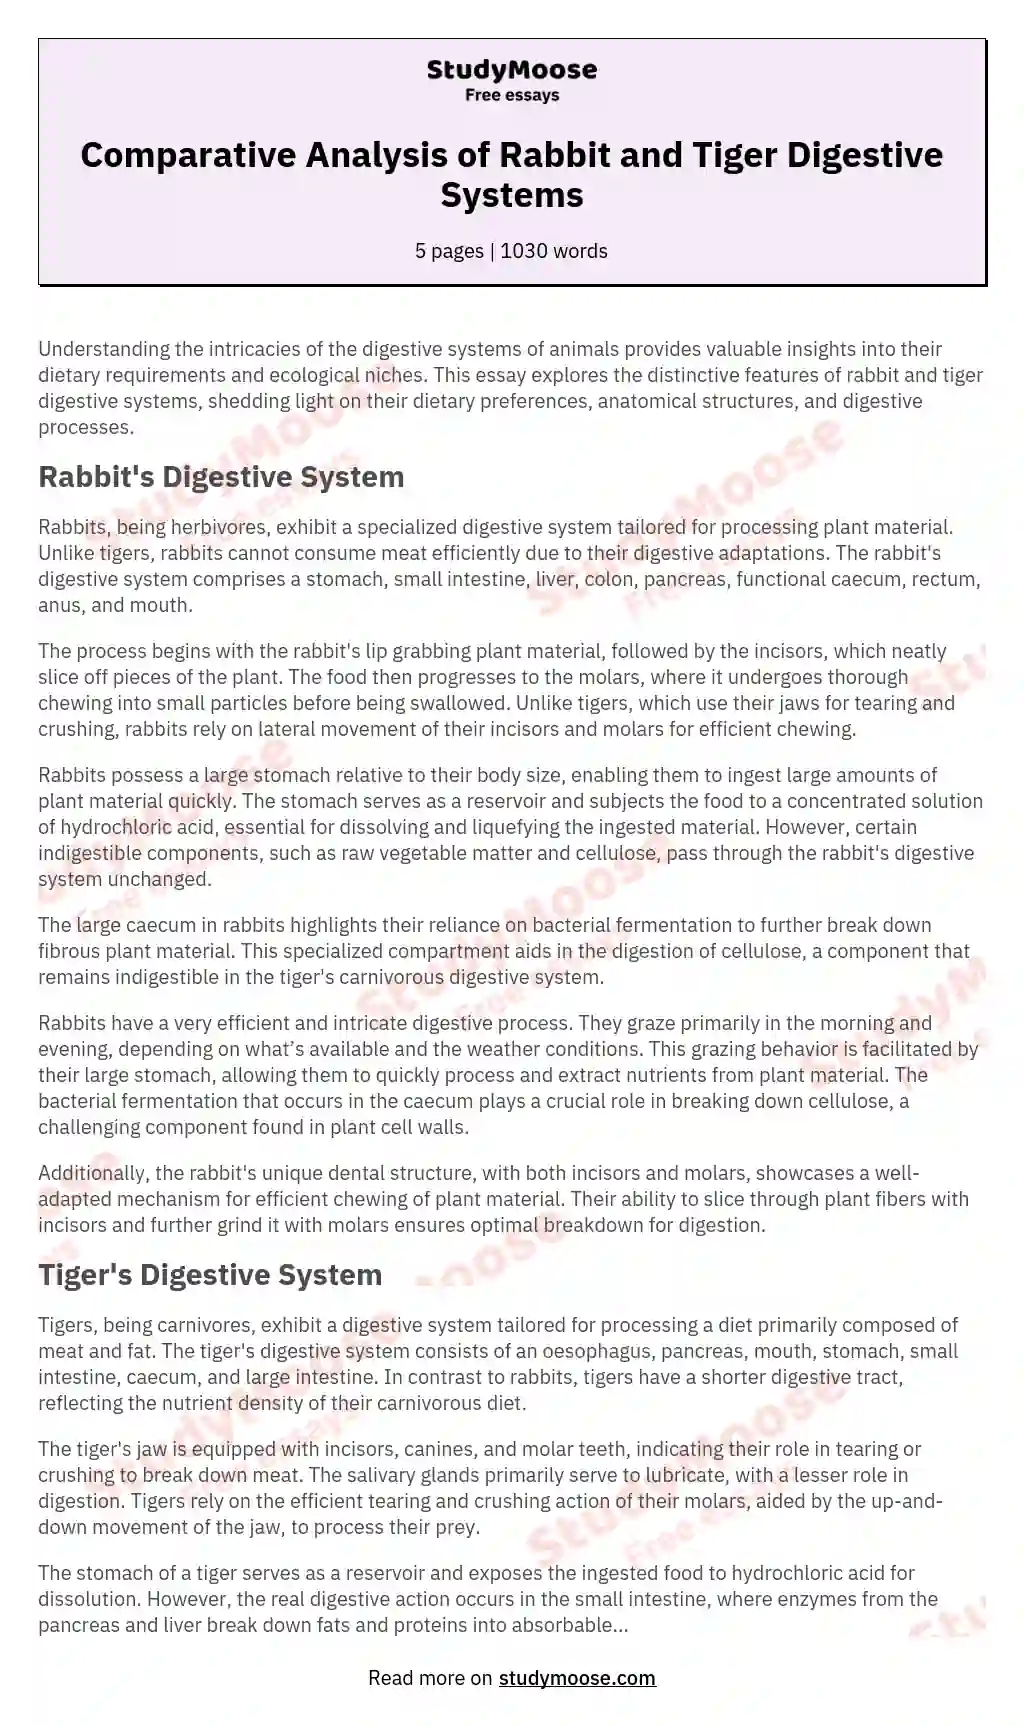 Comparative Analysis of Rabbit and Tiger Digestive Systems essay